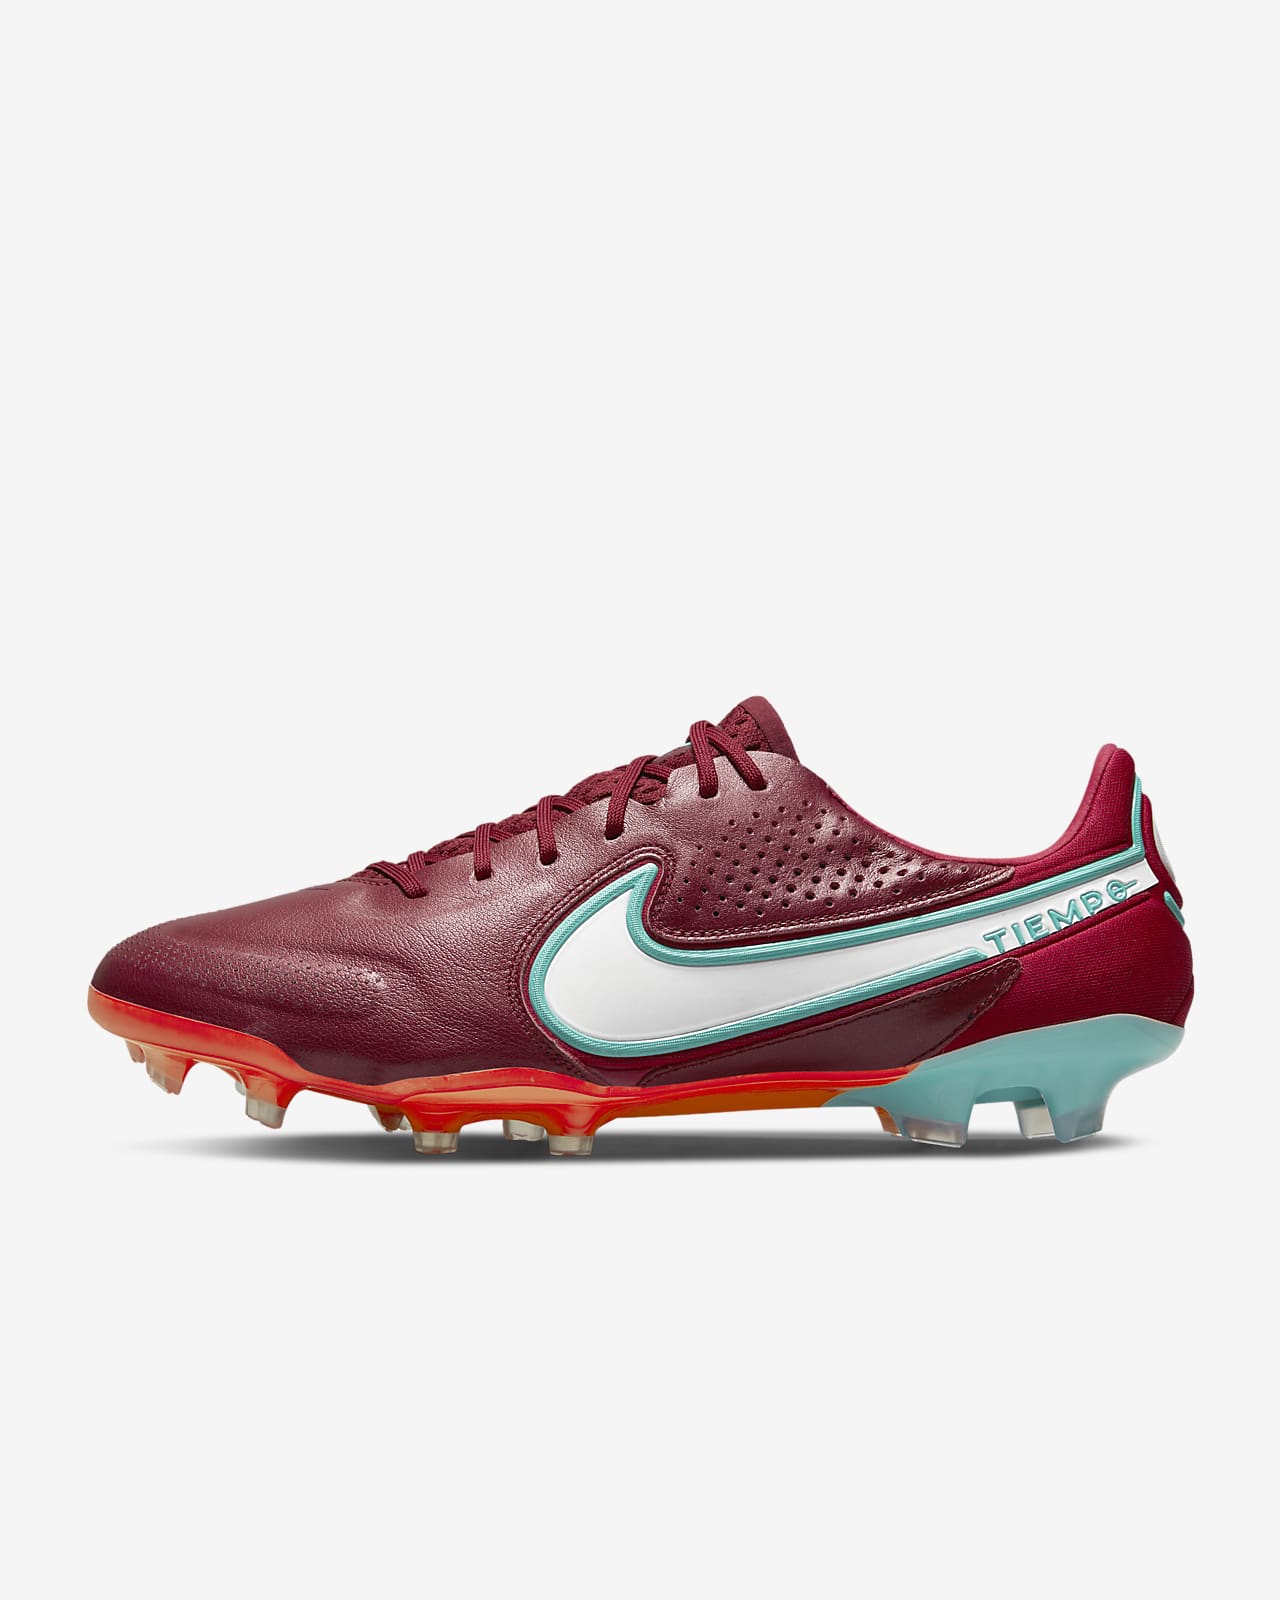 Nike Tiempo 9 Elite Firm-Ground Football Boots. NO